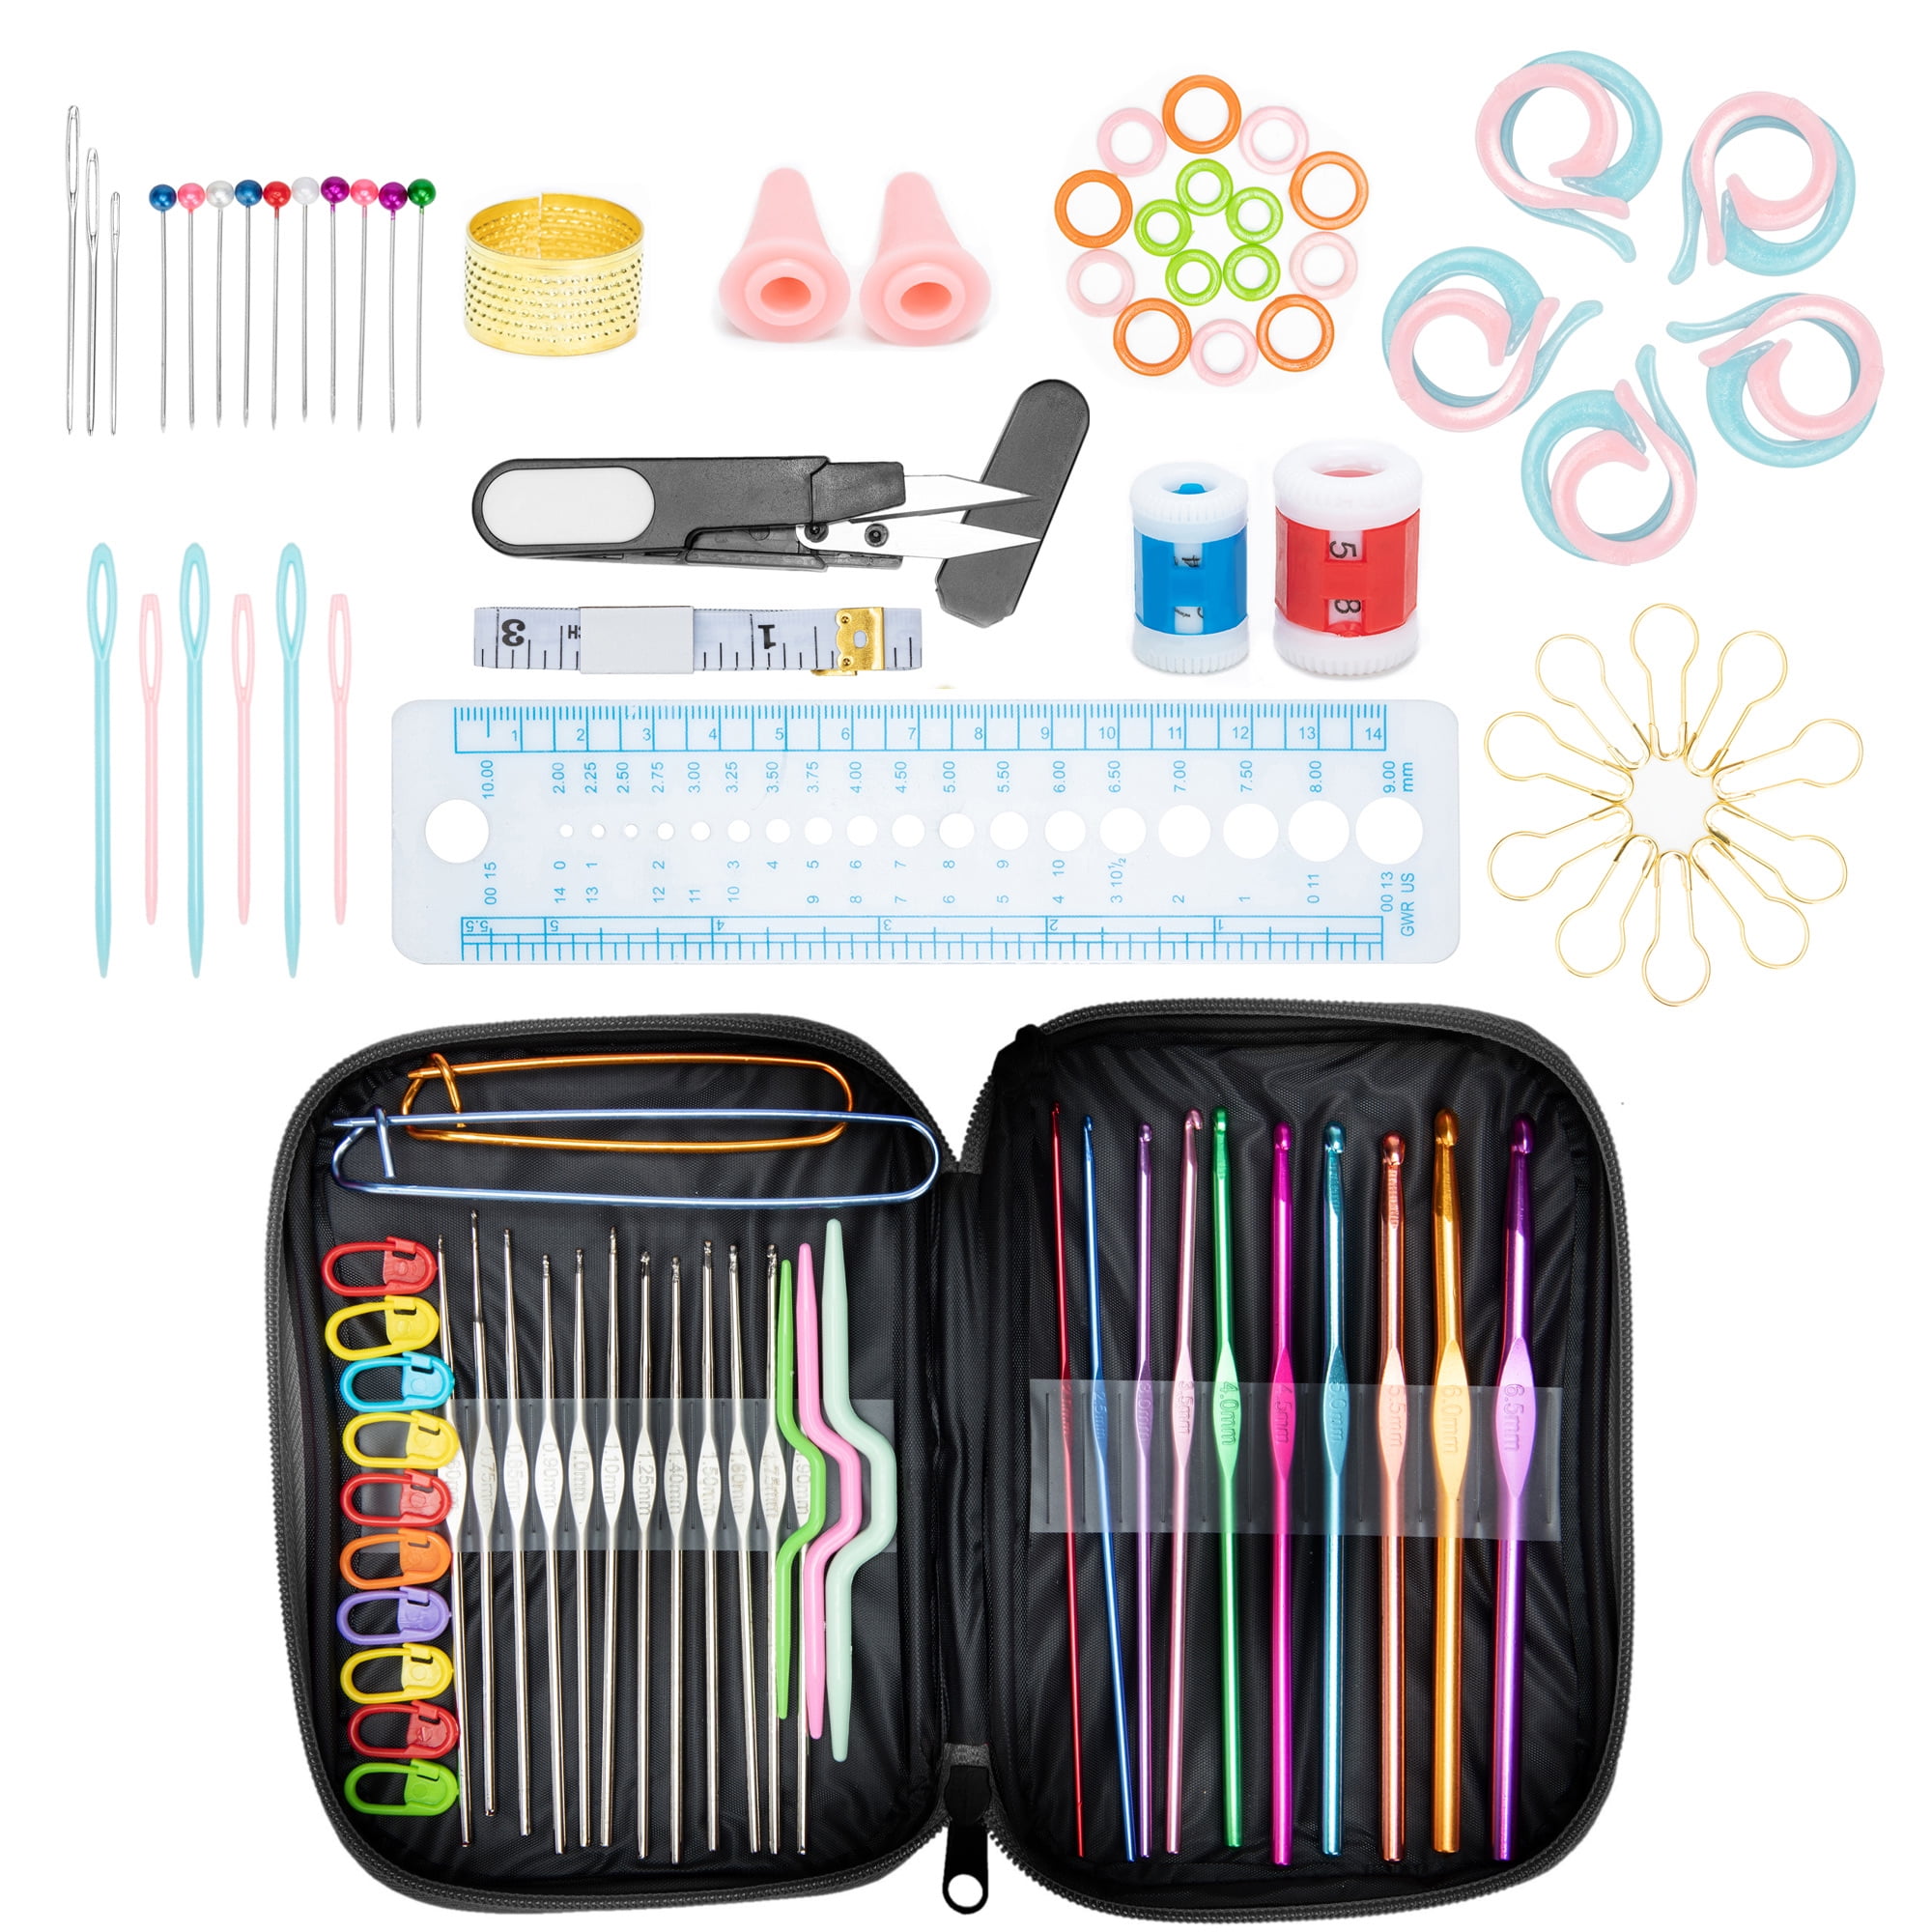 Duety 59Pcs Crochet Hooks Kit,Knitting Starter Kit for Adults Ergonomic  Crochet Soft Grip Handle Crochet Tools DIY Weave Yarn Kits with Carry Bag  for Beginners Adults Gifts 